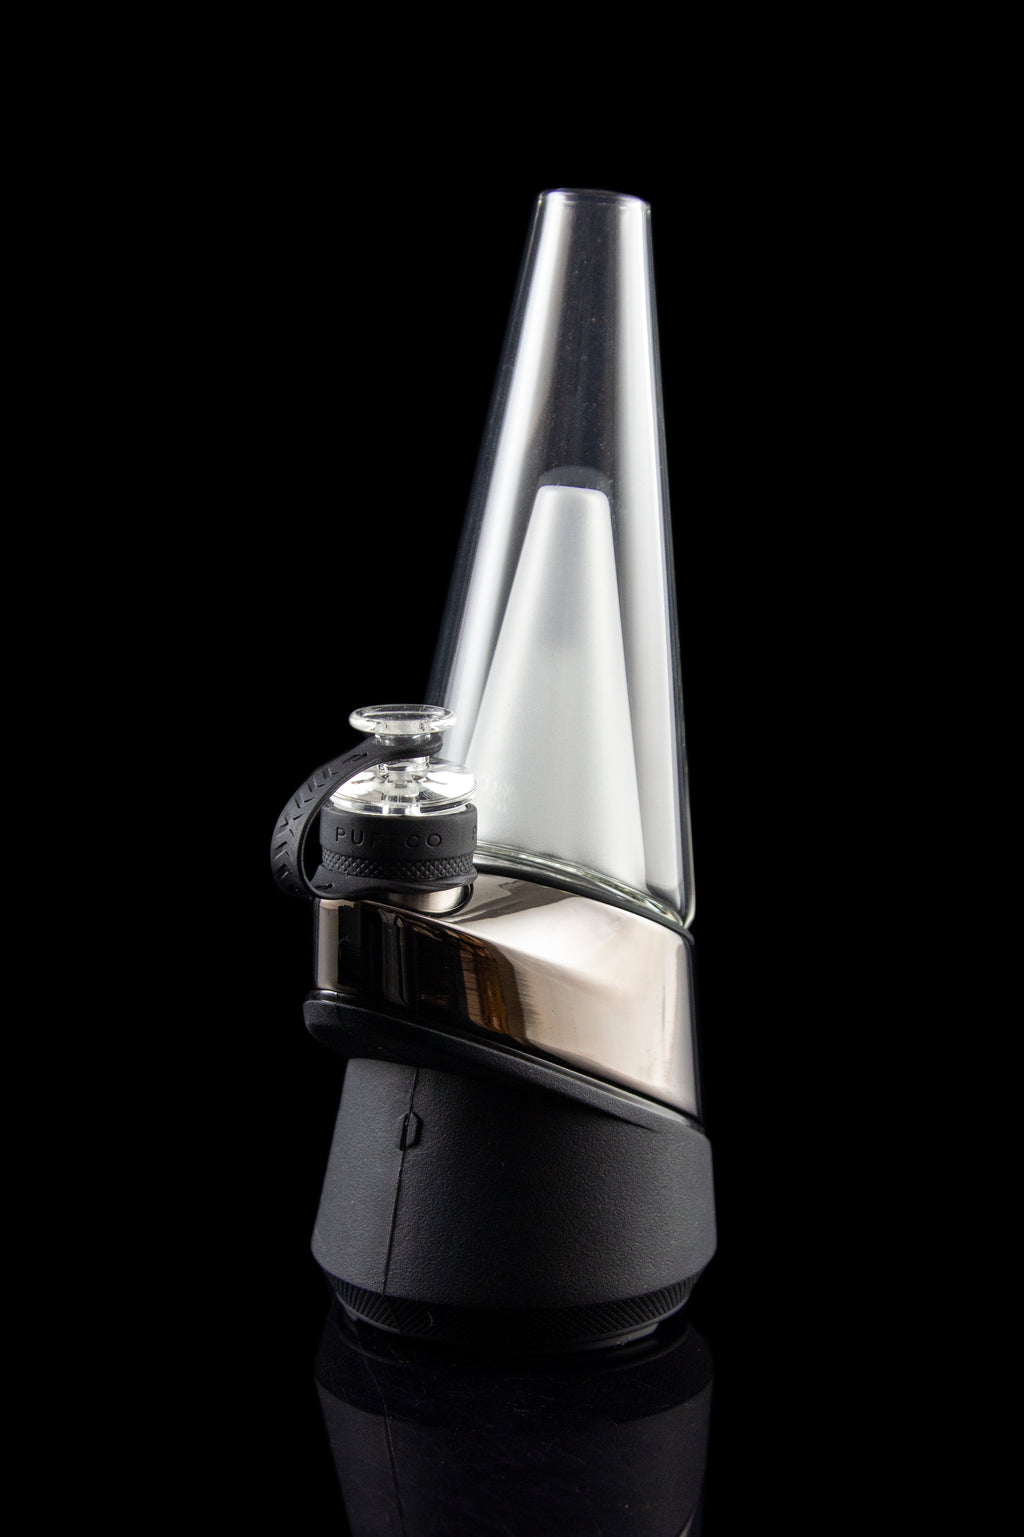 Puffco Peak Pro Review: Is a $400 Electronic Dab Rig Worth It?